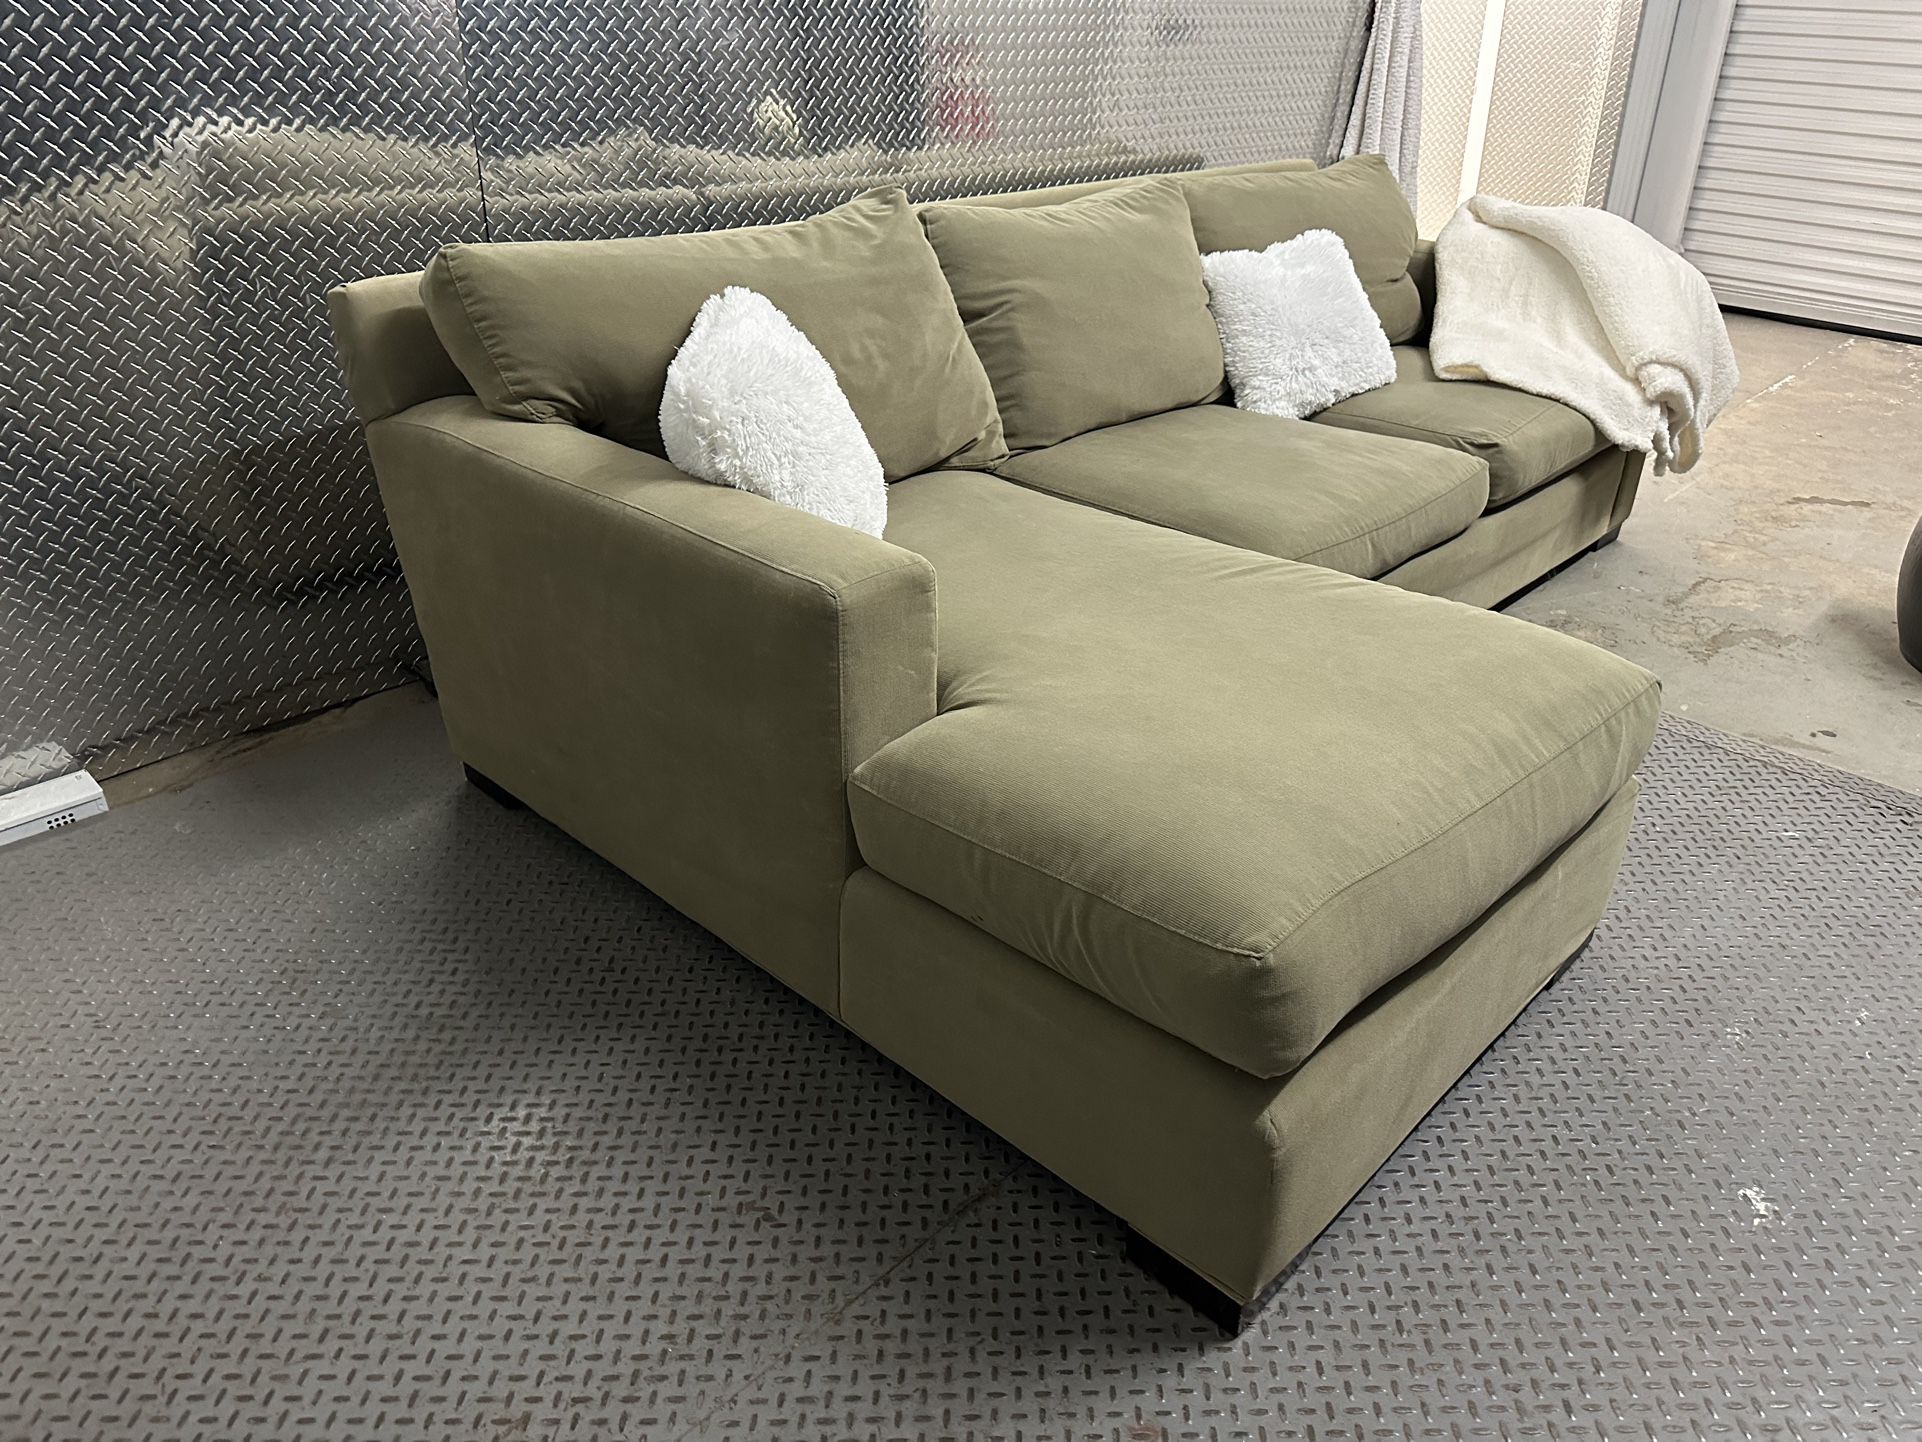 Free Delivery ! Crate & Barrel Olive Green Sectional Chaise STRONG DURABLE